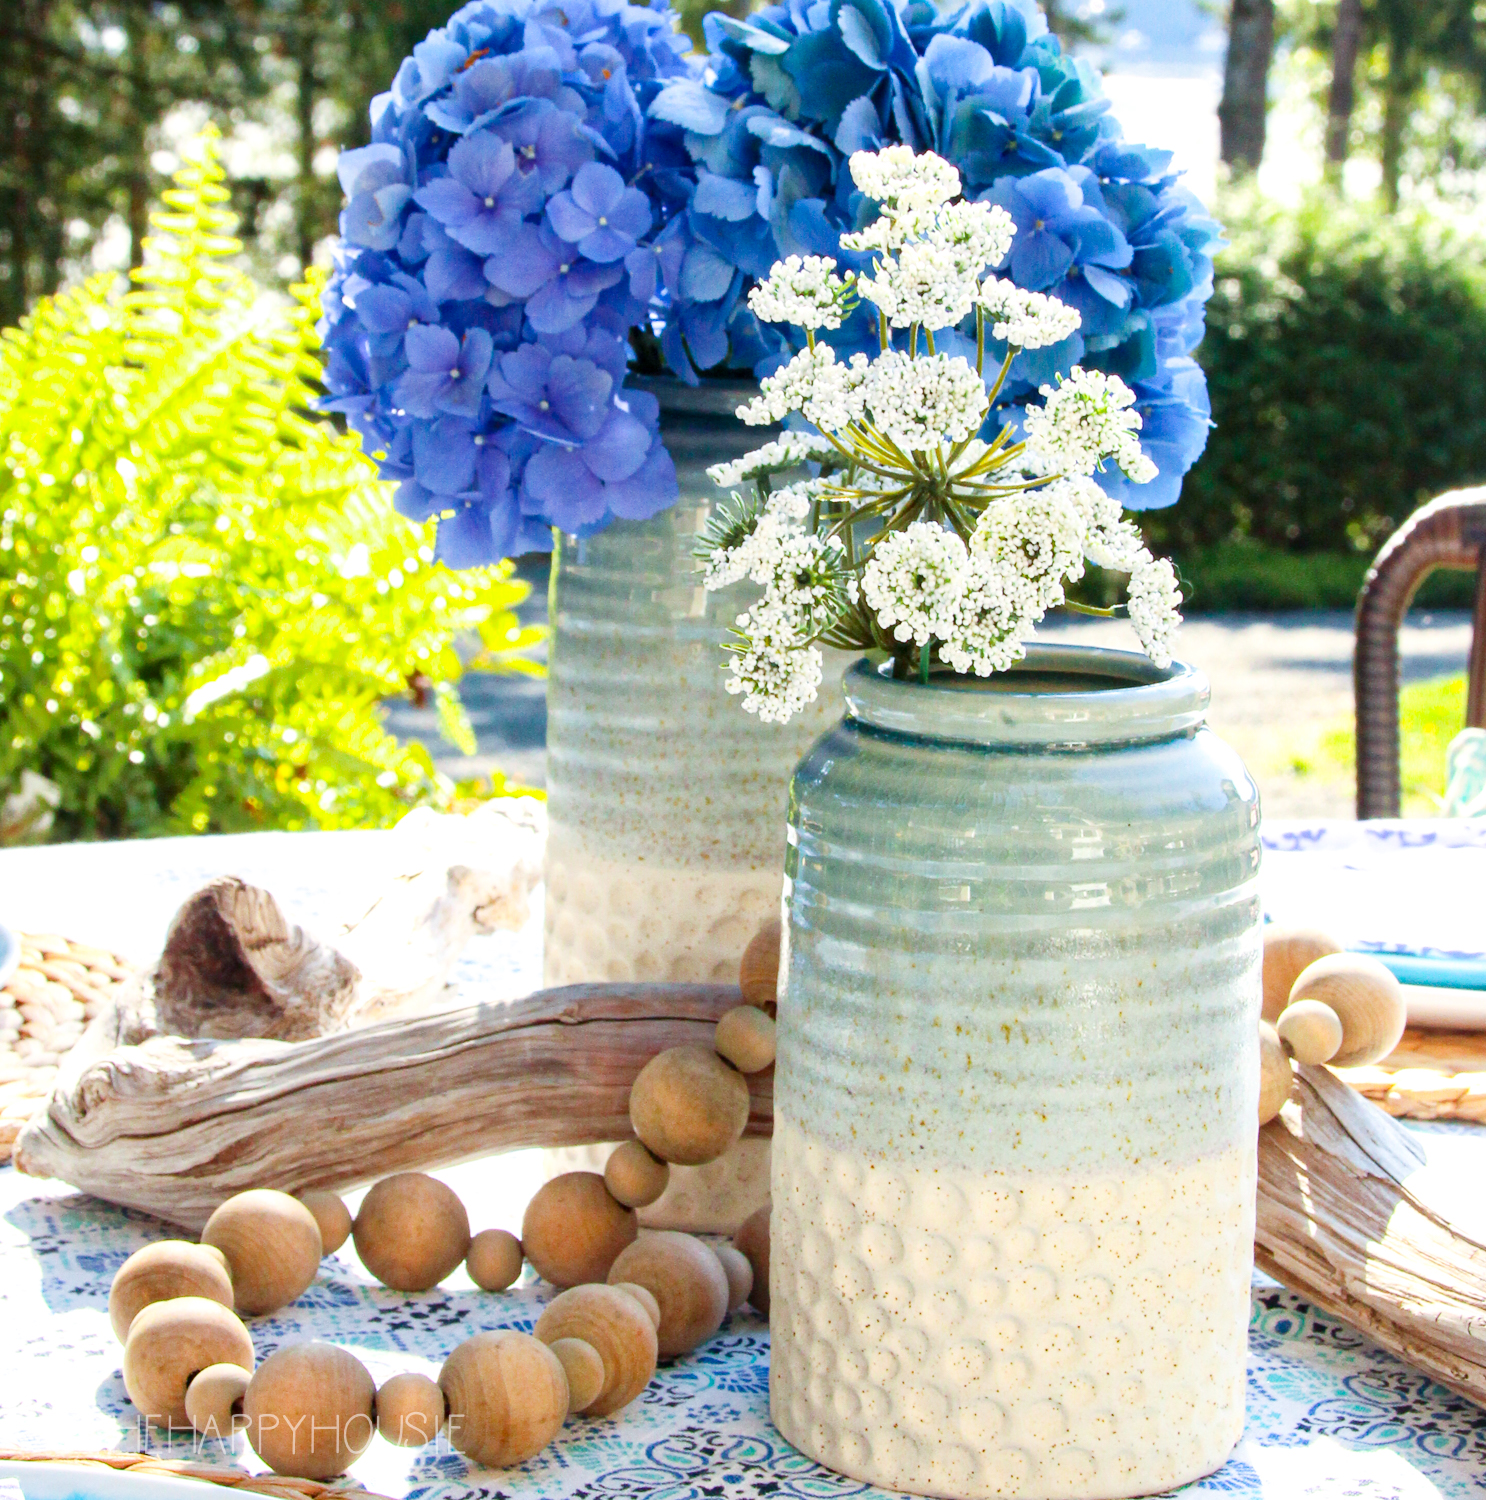 A ceramic vase with white flowers is beside the hydrangeas.